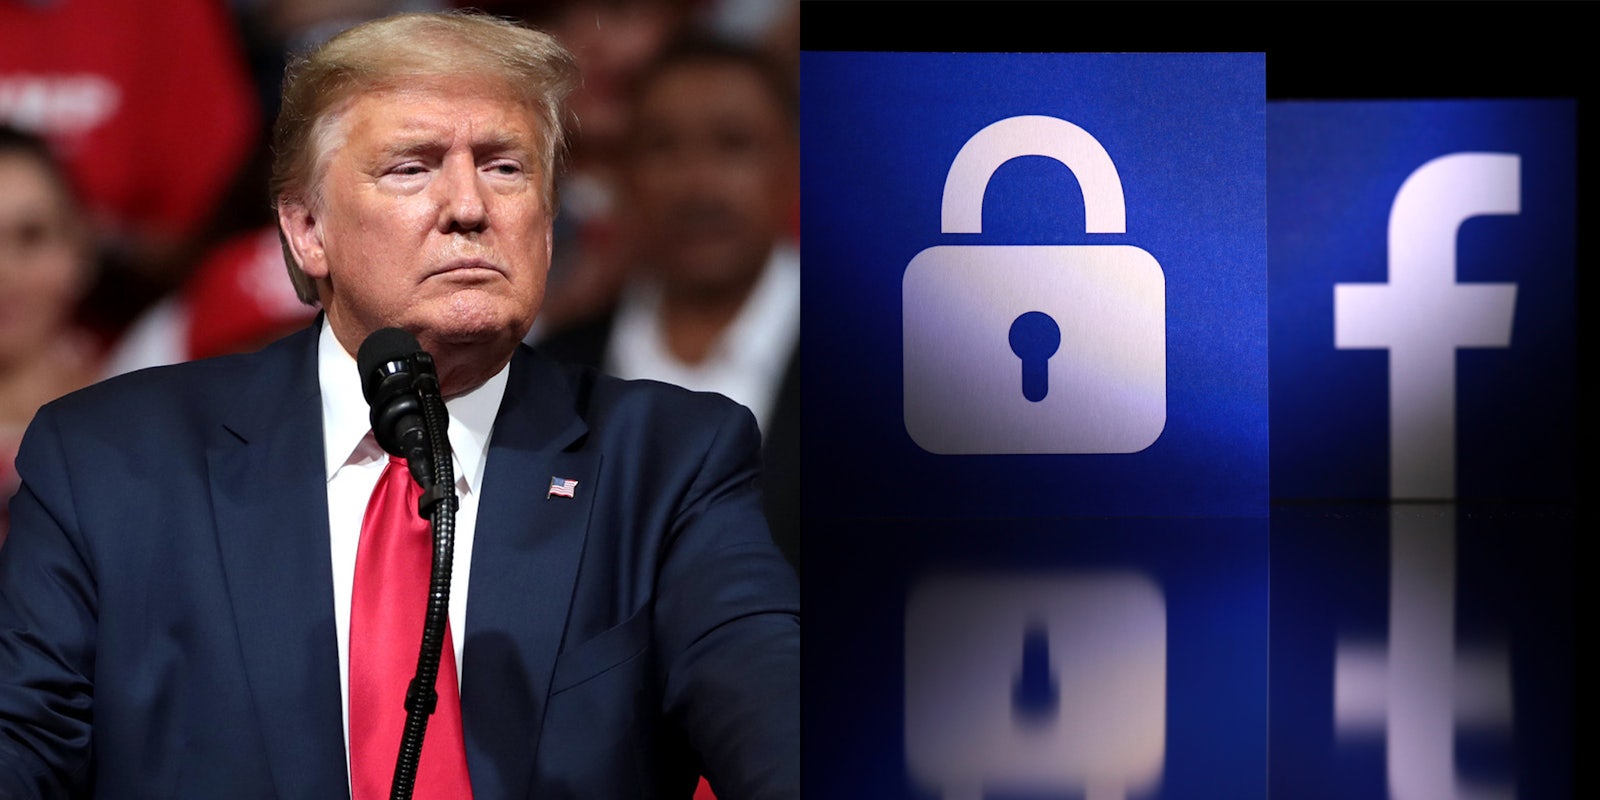 A side by side of former President Donald Trump next to the Facebook logo and a lock.